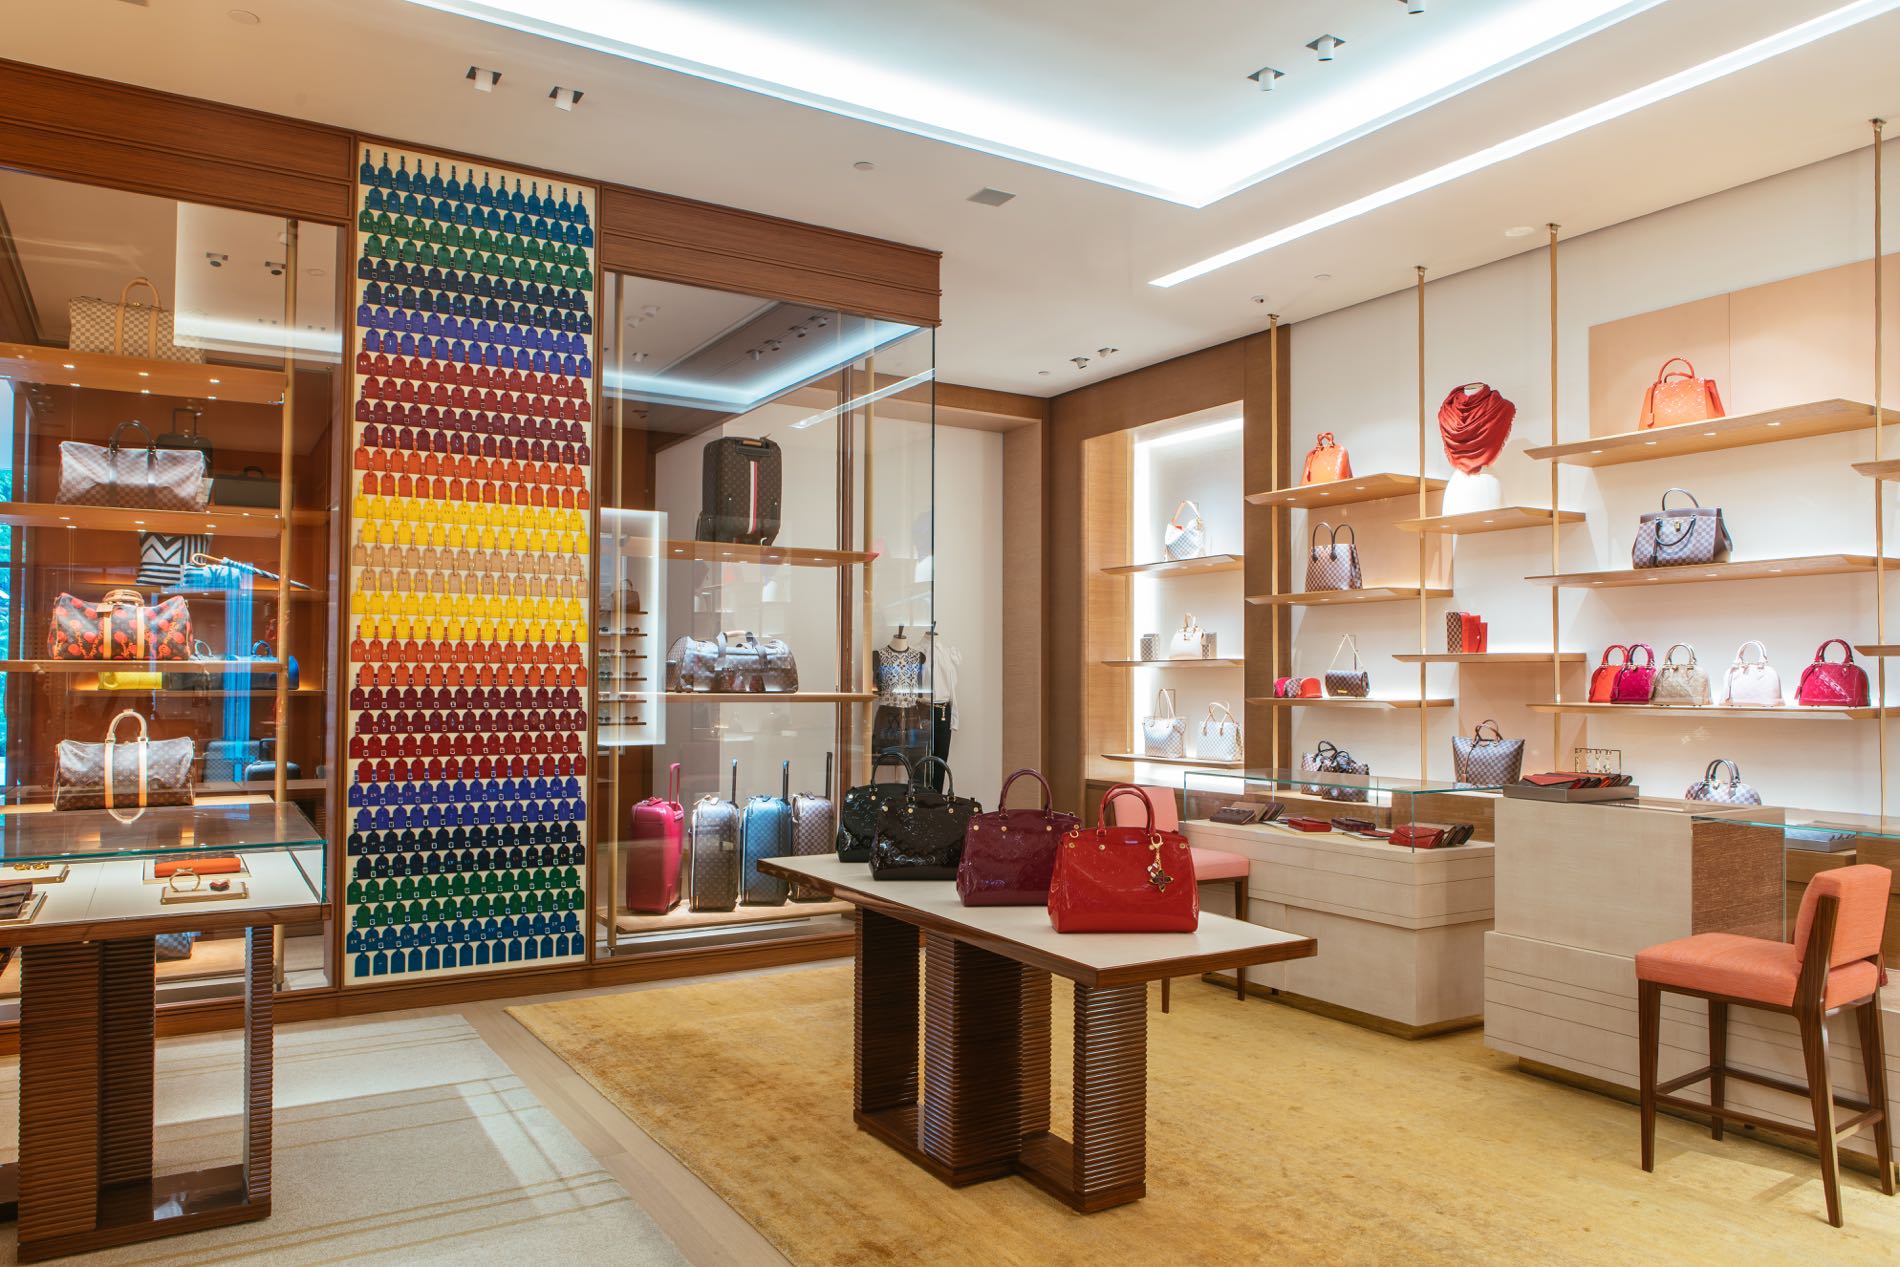 Louis Vuitton, The LV mascot display at ION Orchard, Orchar…